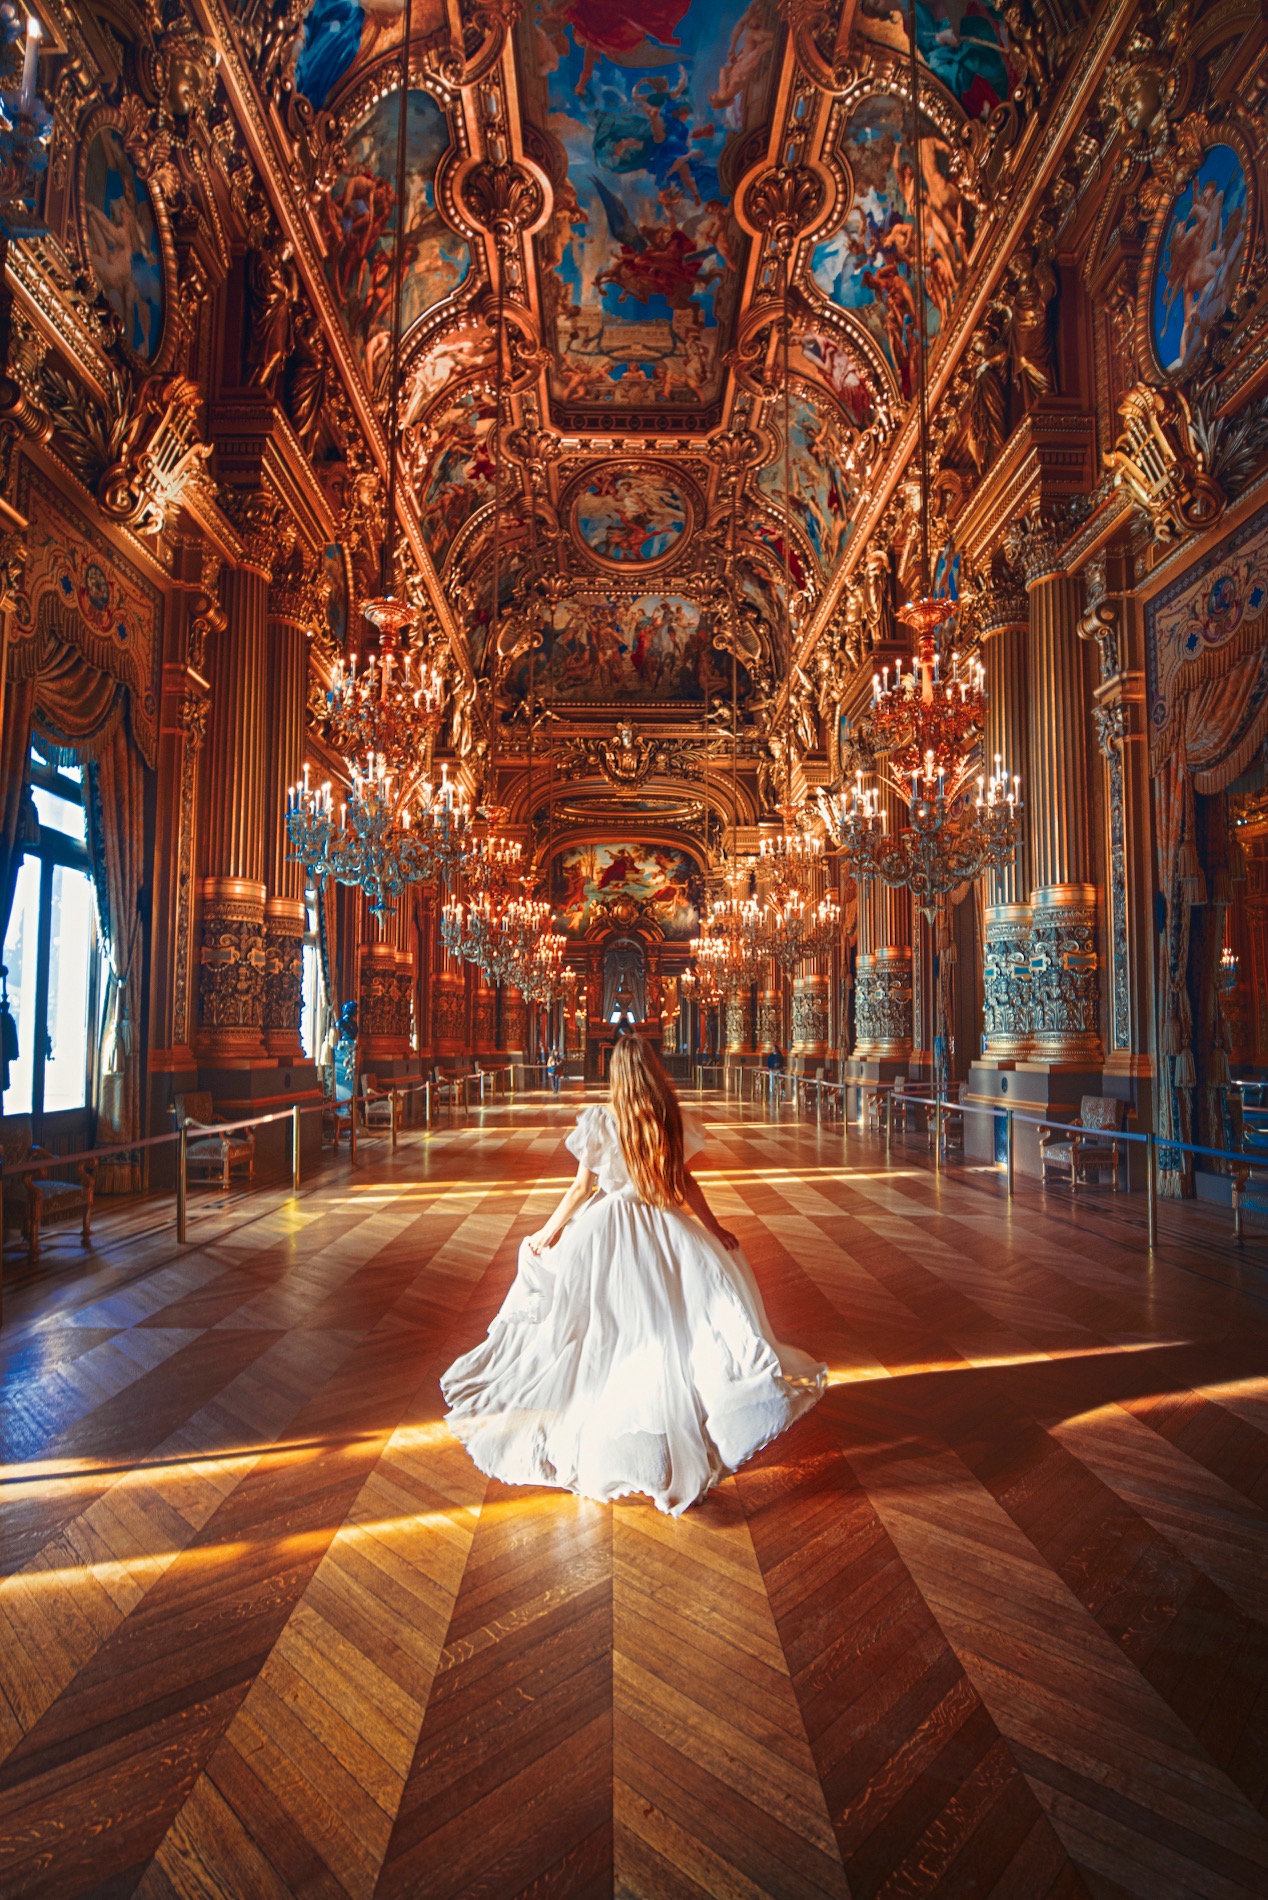 Woman in white dress walking through hall full of chandeliers in Palais Garnier, one of the most beautiful places in Paris.